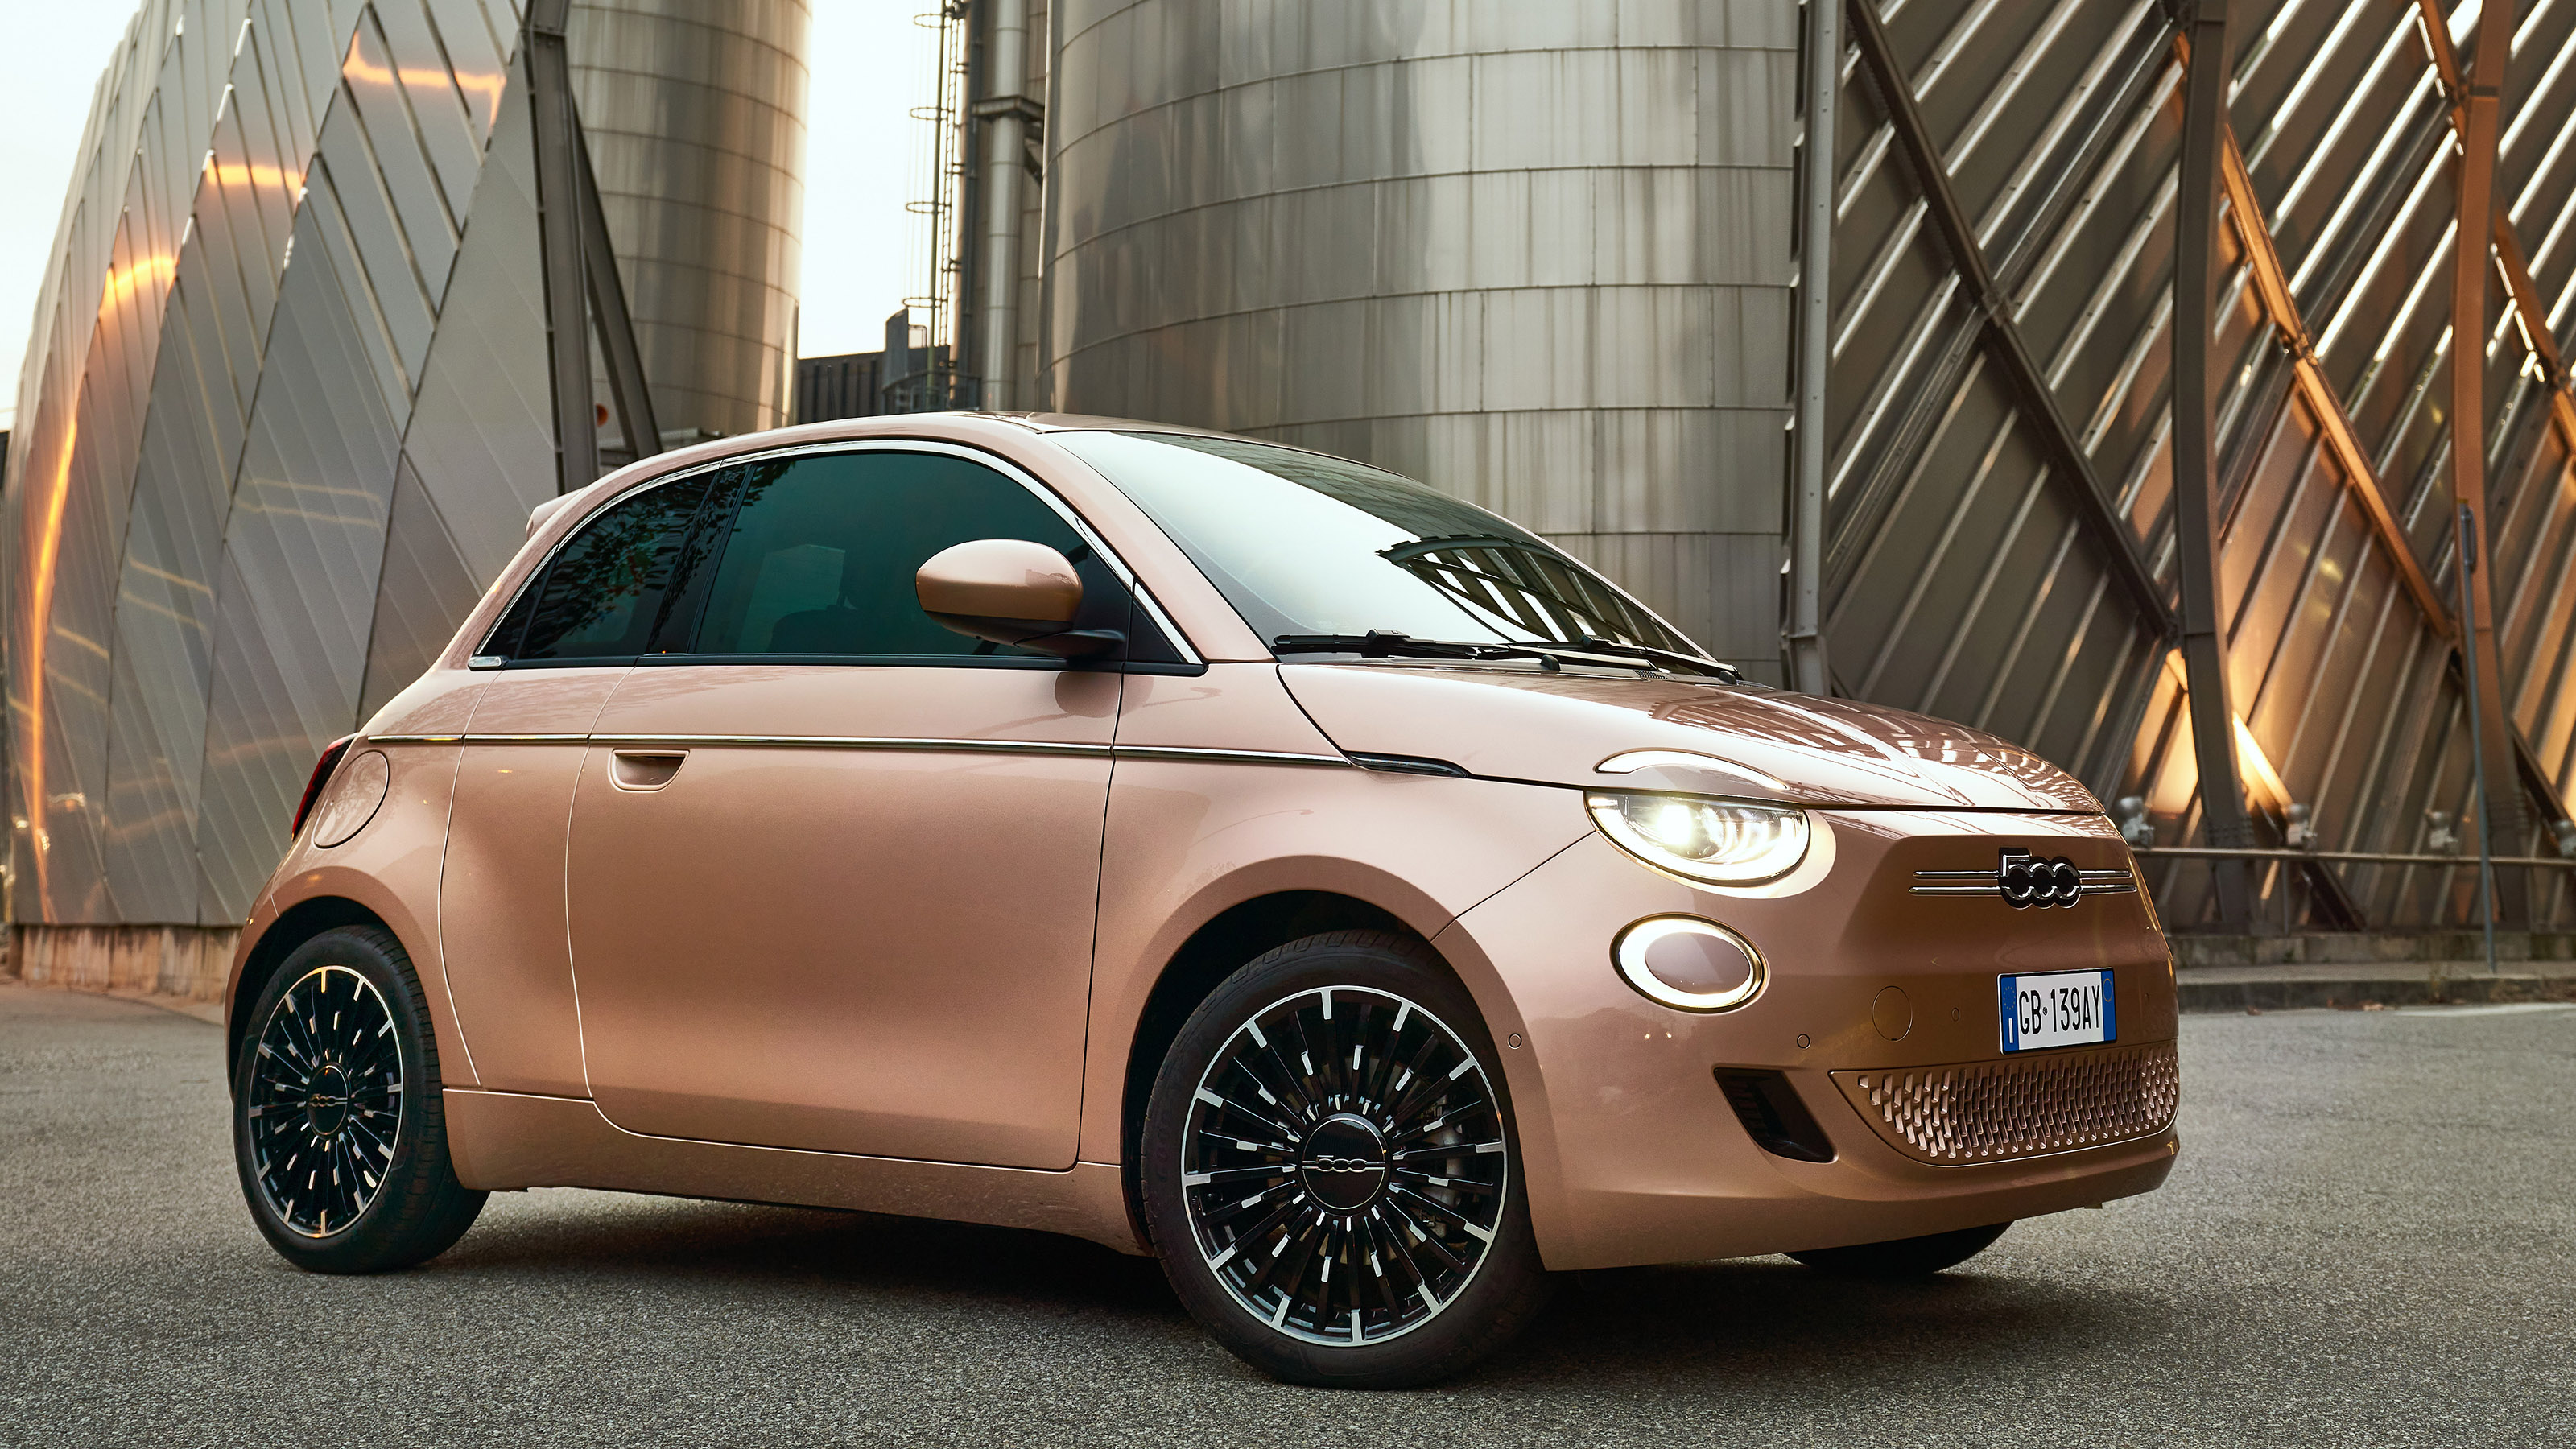 Fiat 500 3+1 could be set for the UK Auto Express